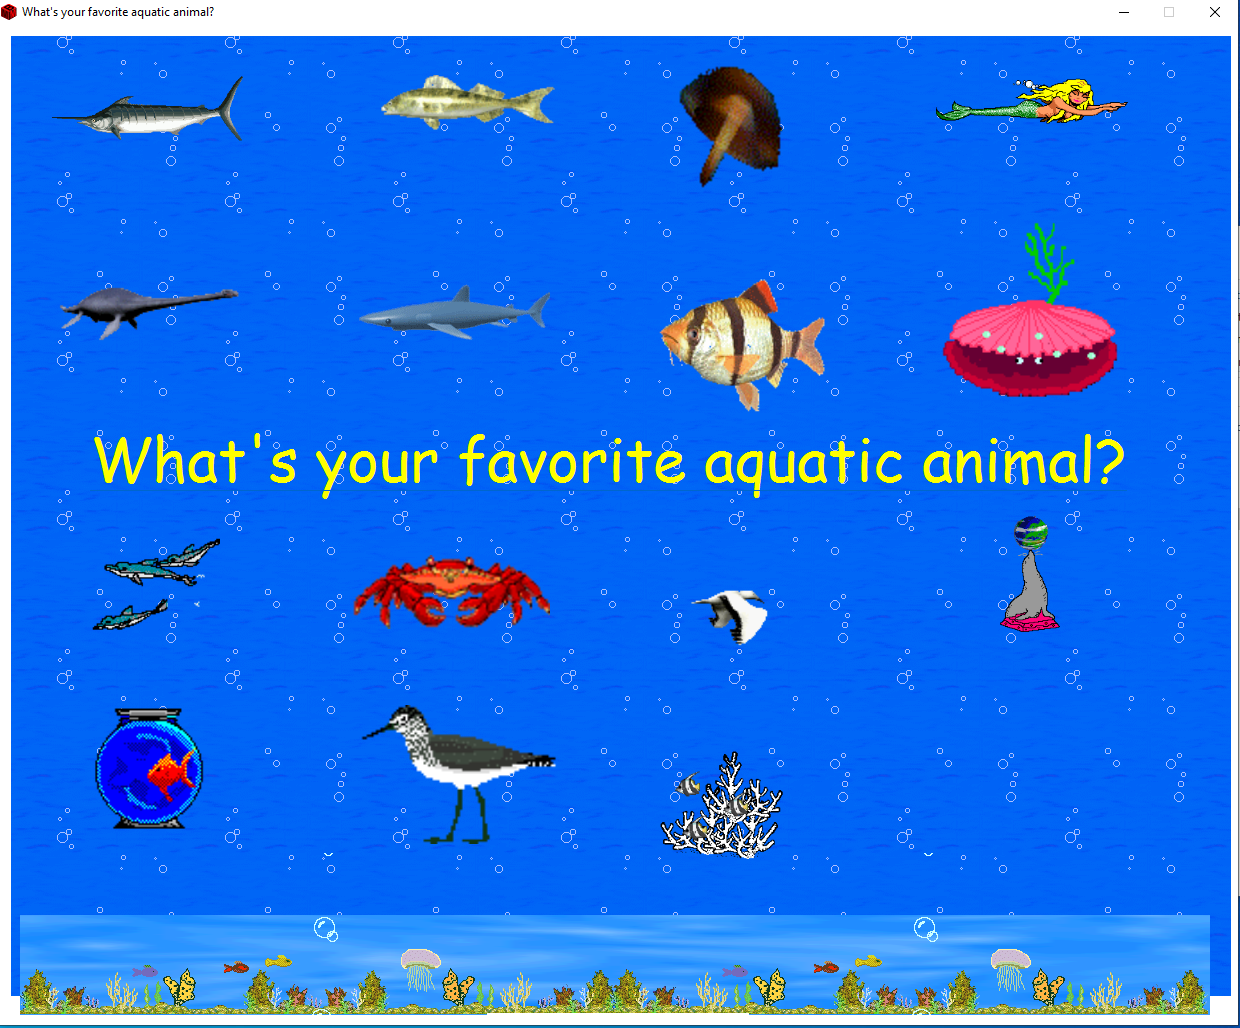 Which fish do you like the most?